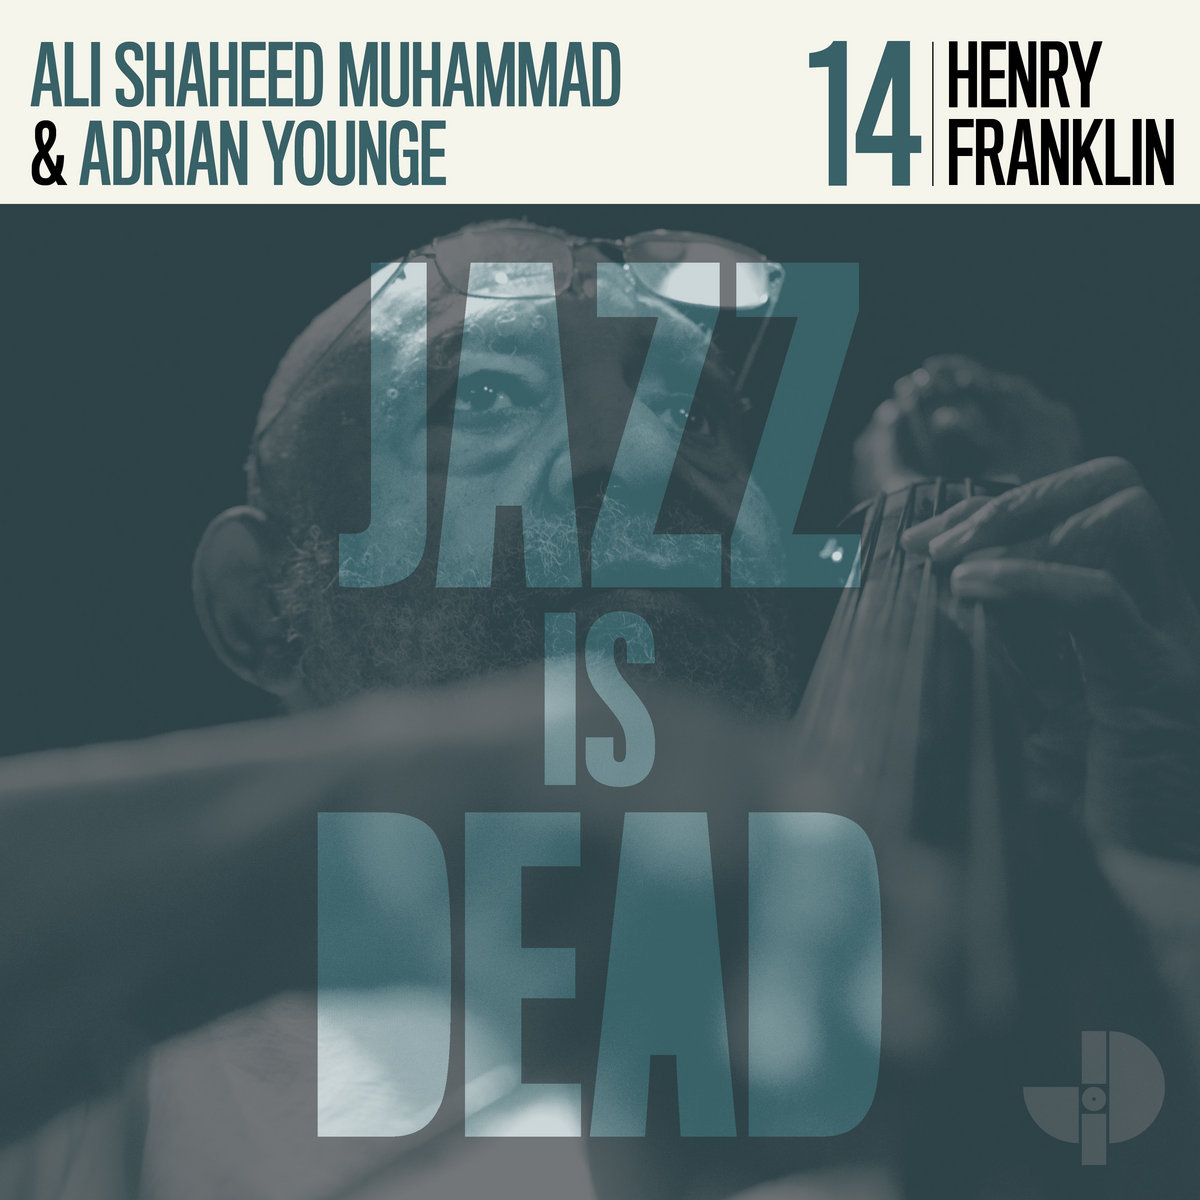 HENLY FRANKLIN (JAZZ IS DEAD 014)